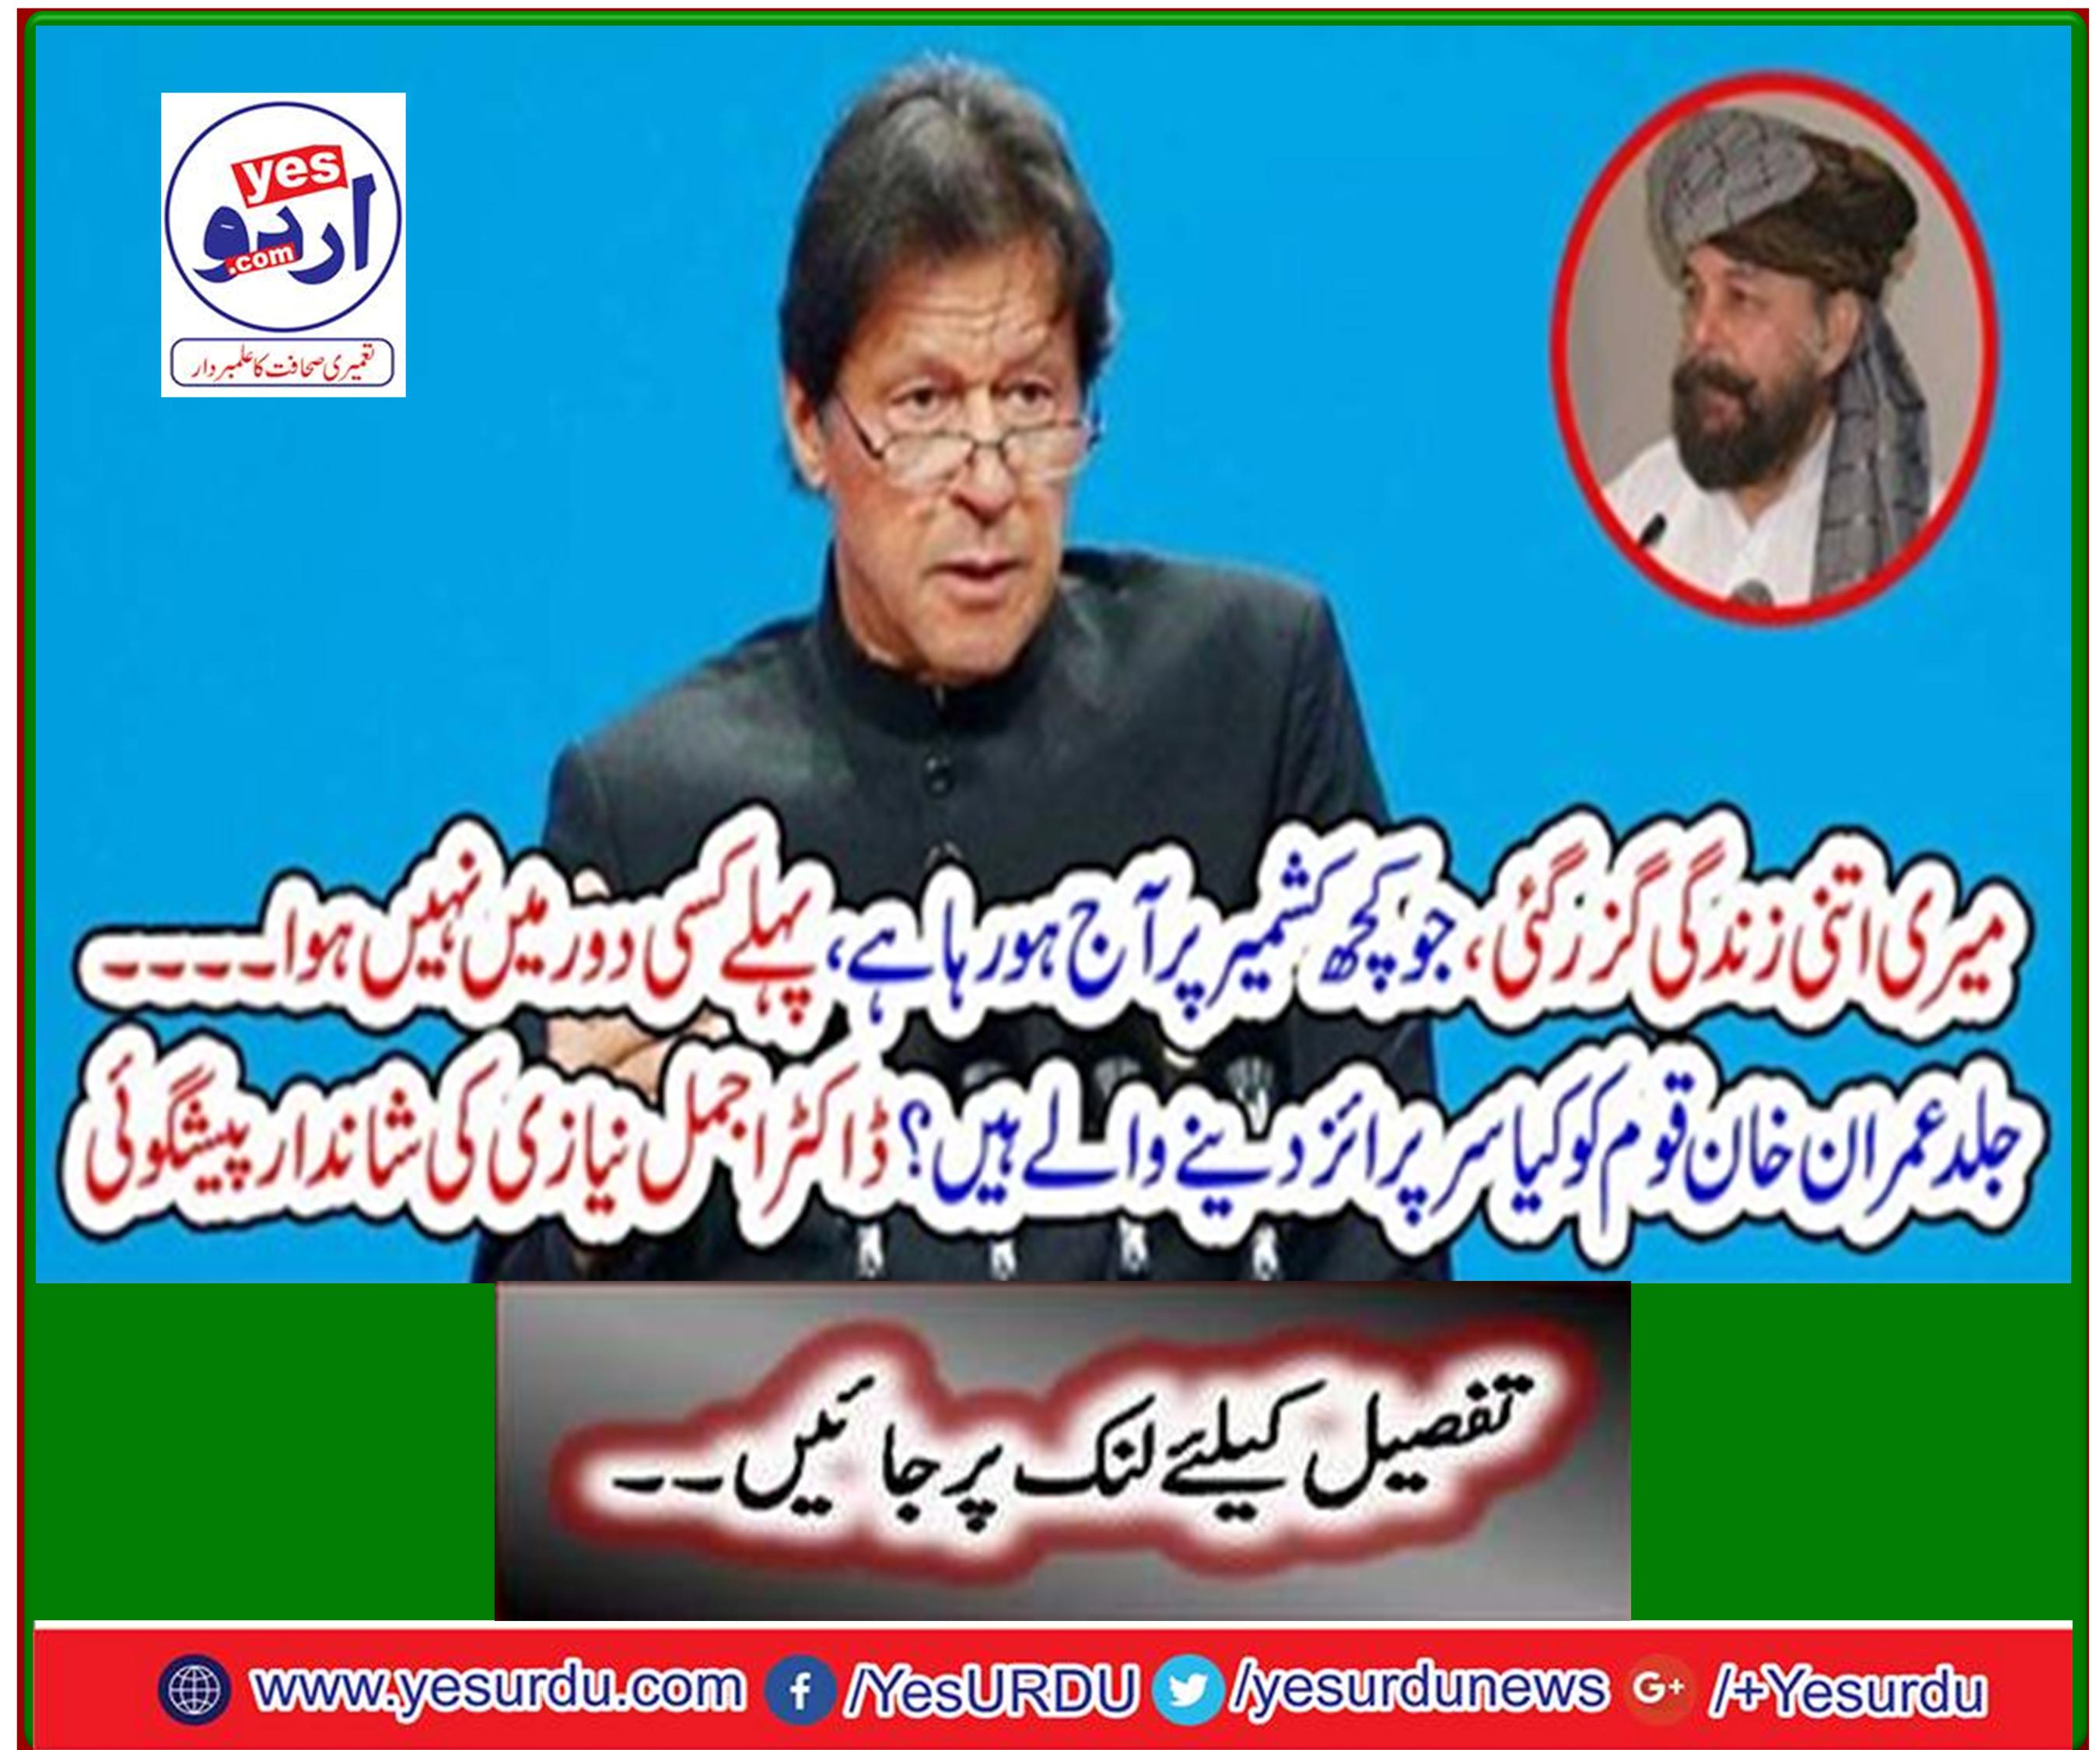 Imran Khan is going to give the nation a surprise? Excellent presentation by Dr. Ajmal Niazi